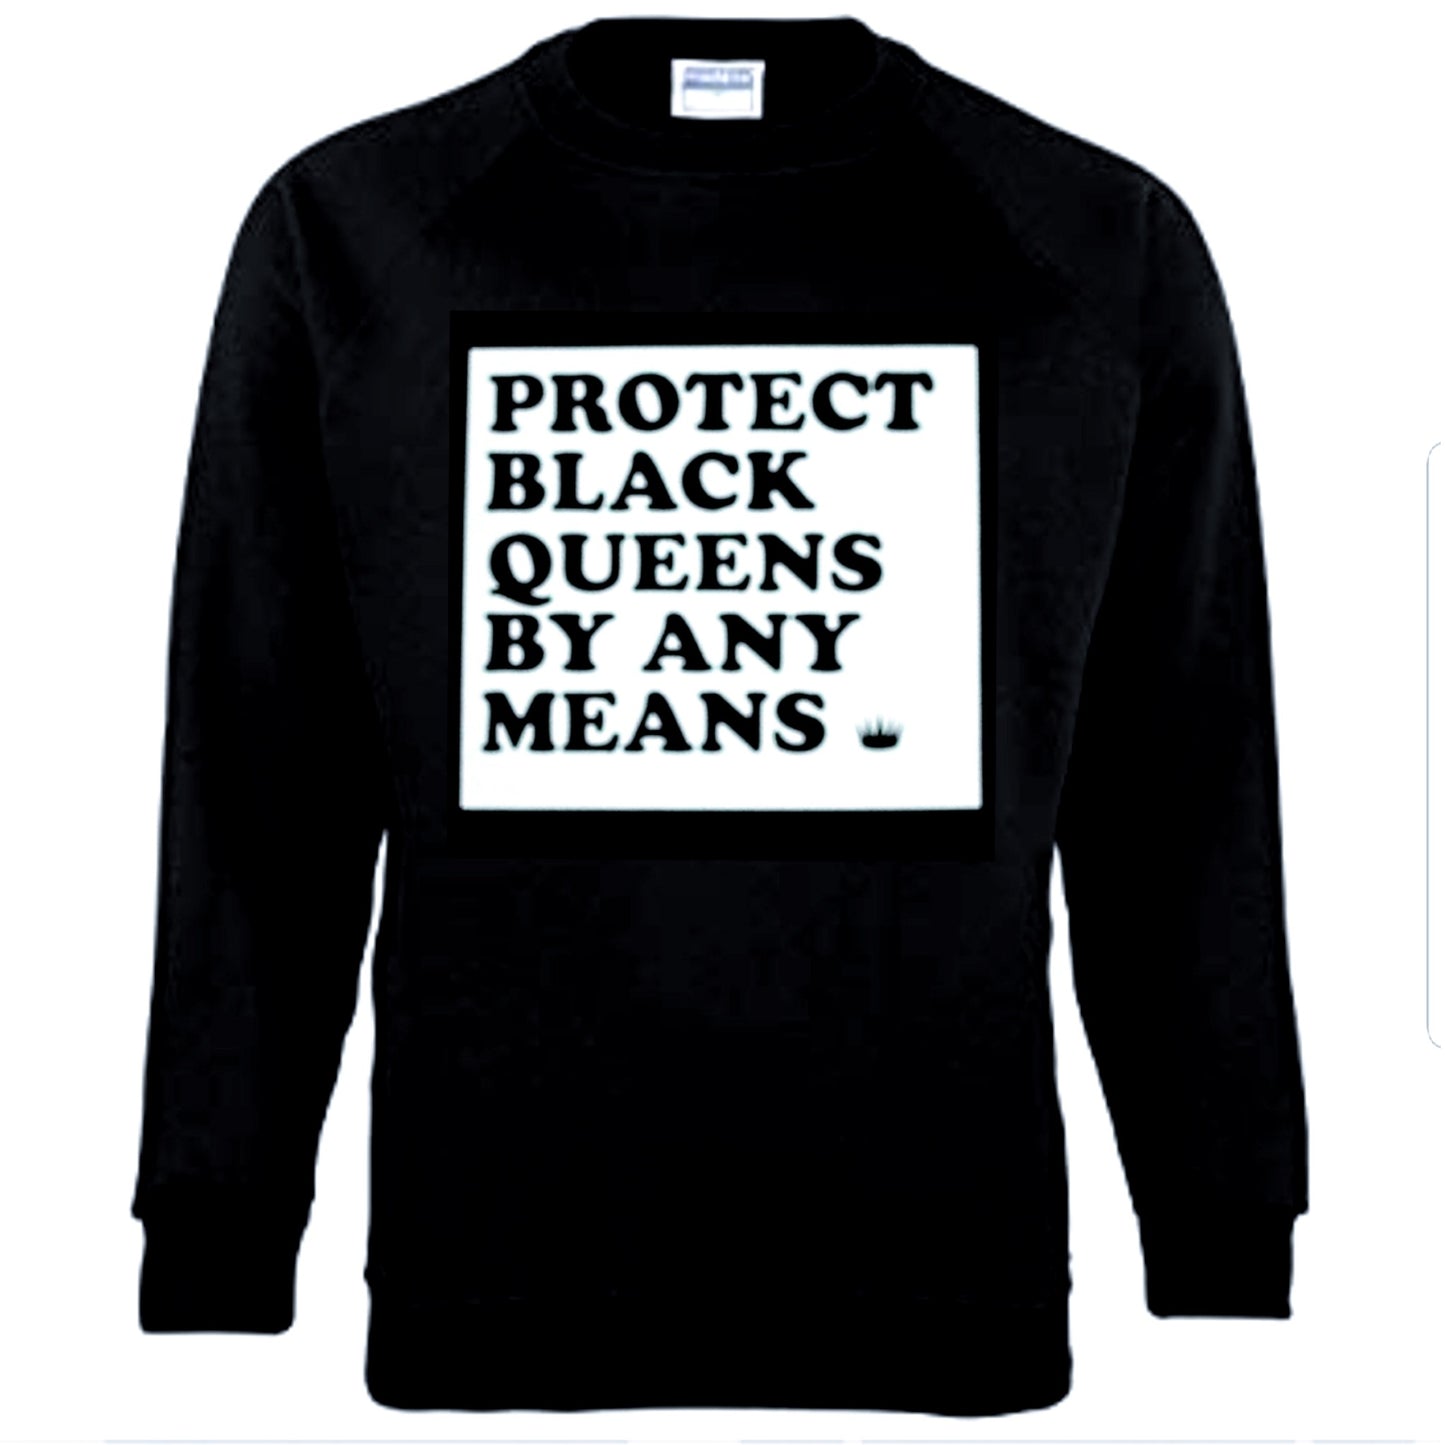 Protect Black Queens By Any Means - Sweatshirt (Clearance)